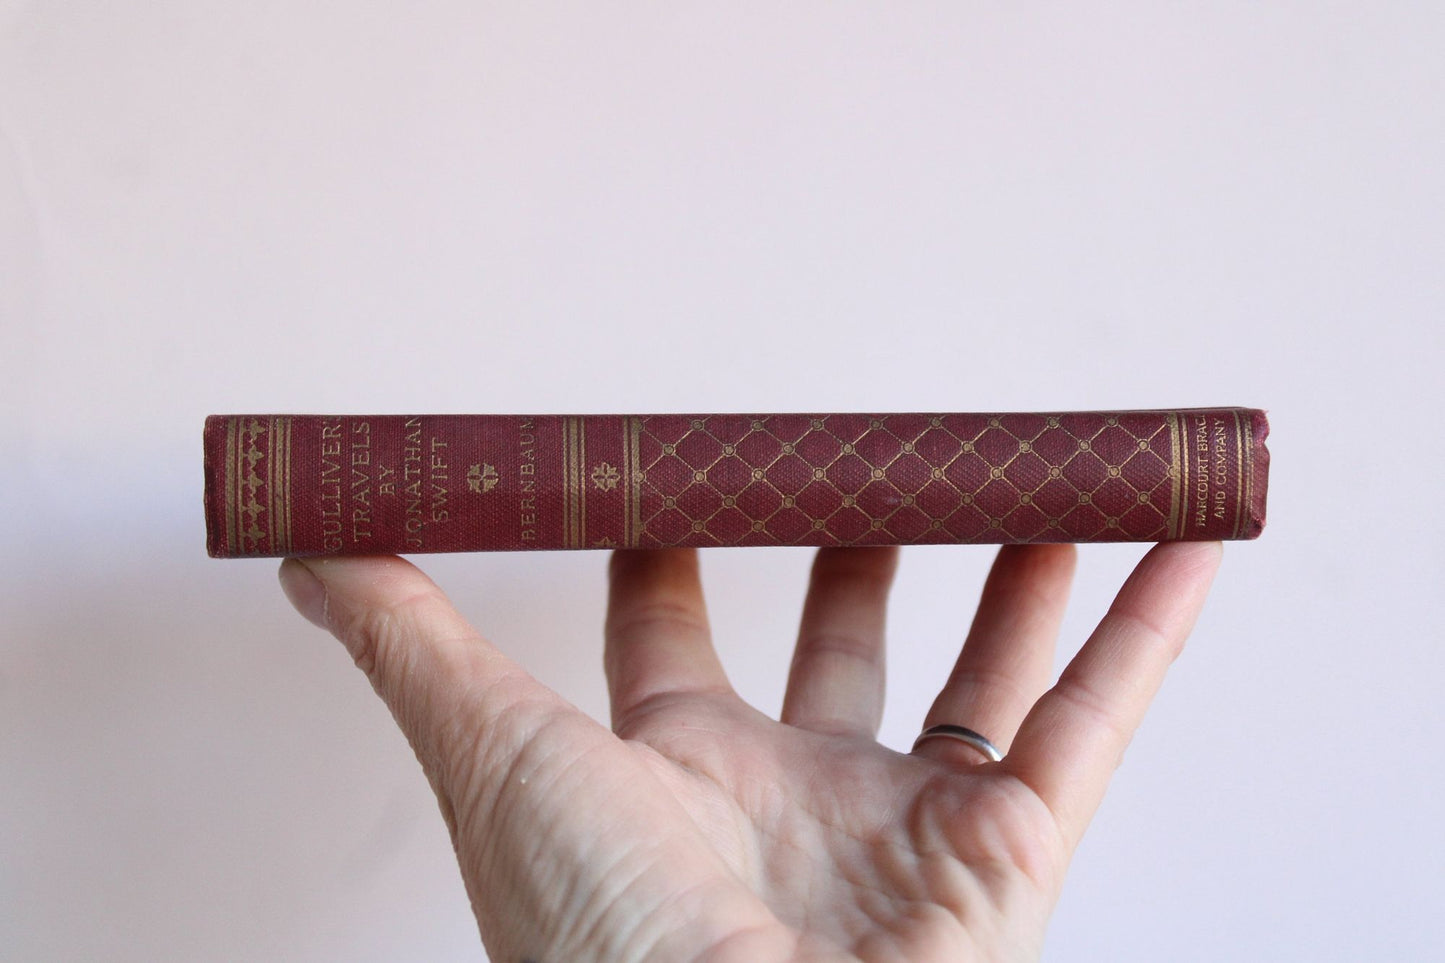 Vintage Antique 1920s Book, "Gulliver's Travels", by Jonathan Swift